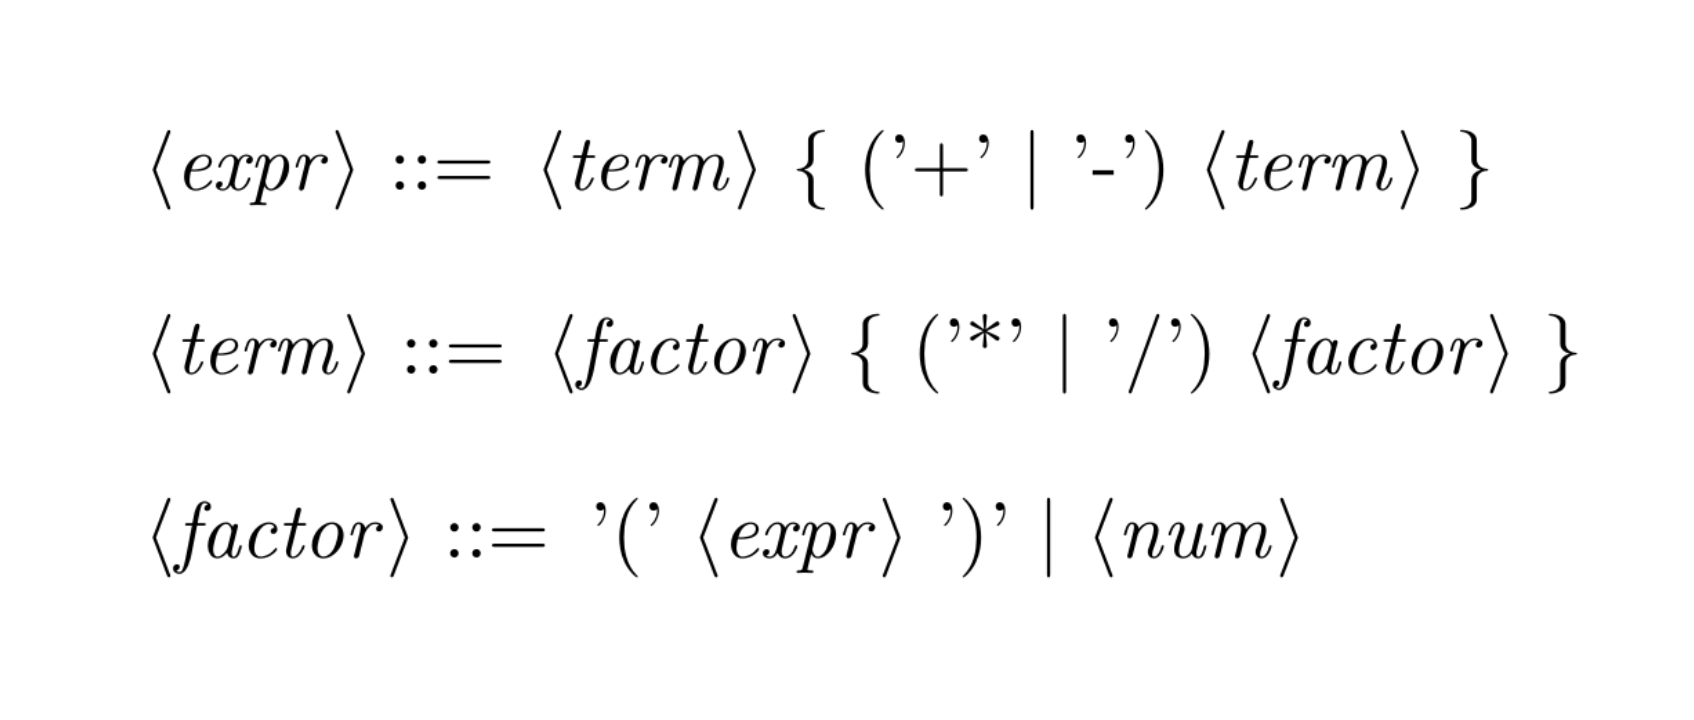 Figure 4: A grammar for parsing expressions